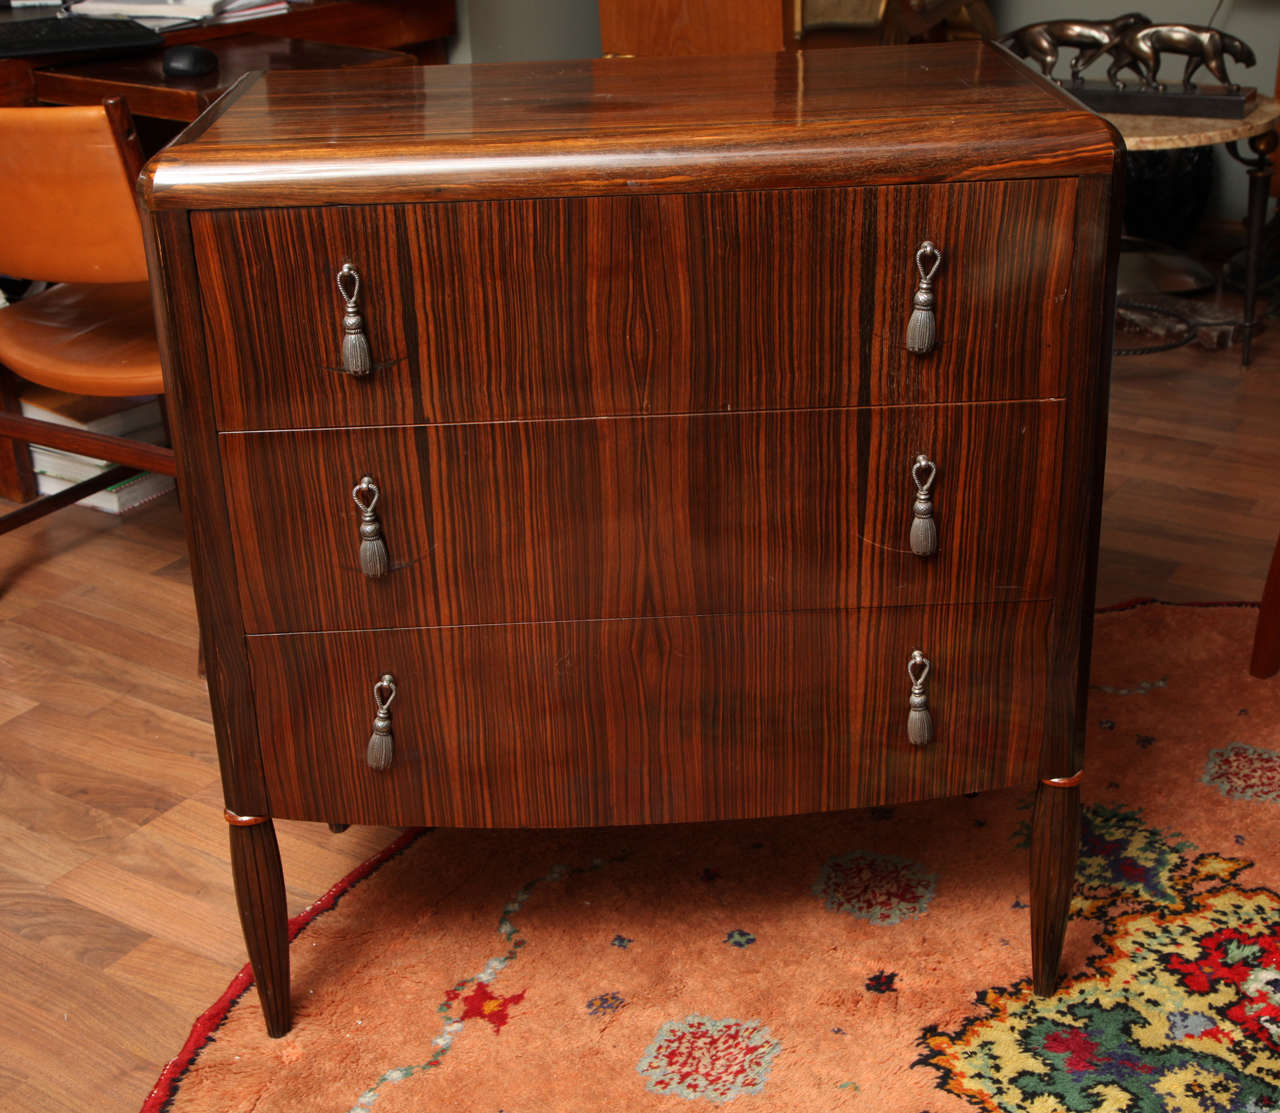 An elegant French Art Deco chest of drawers, veneered in Macassar ebony, with three drawers, silvered bronze trimmings on tapered gadrooned legs, circa 1930.